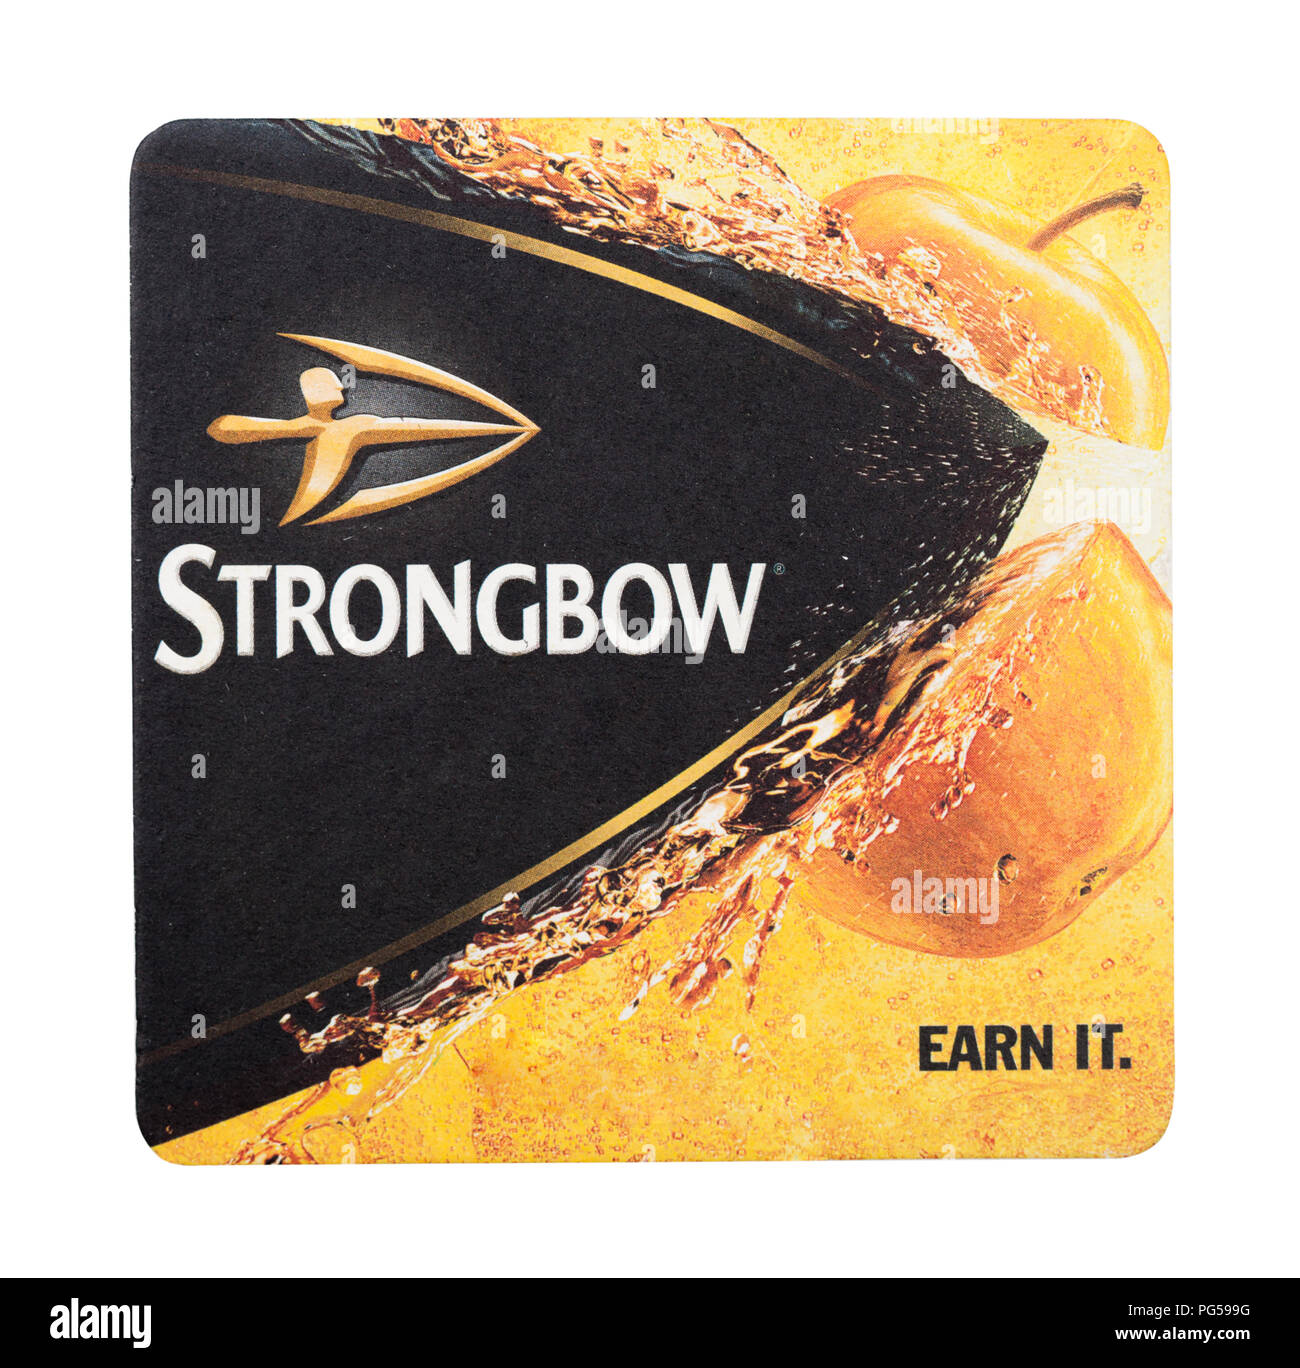 NEW !! 10 X STRONGBOW DARK FRUIT CIDER CARDBOARD BEER MATS FROM Brand New FREE 